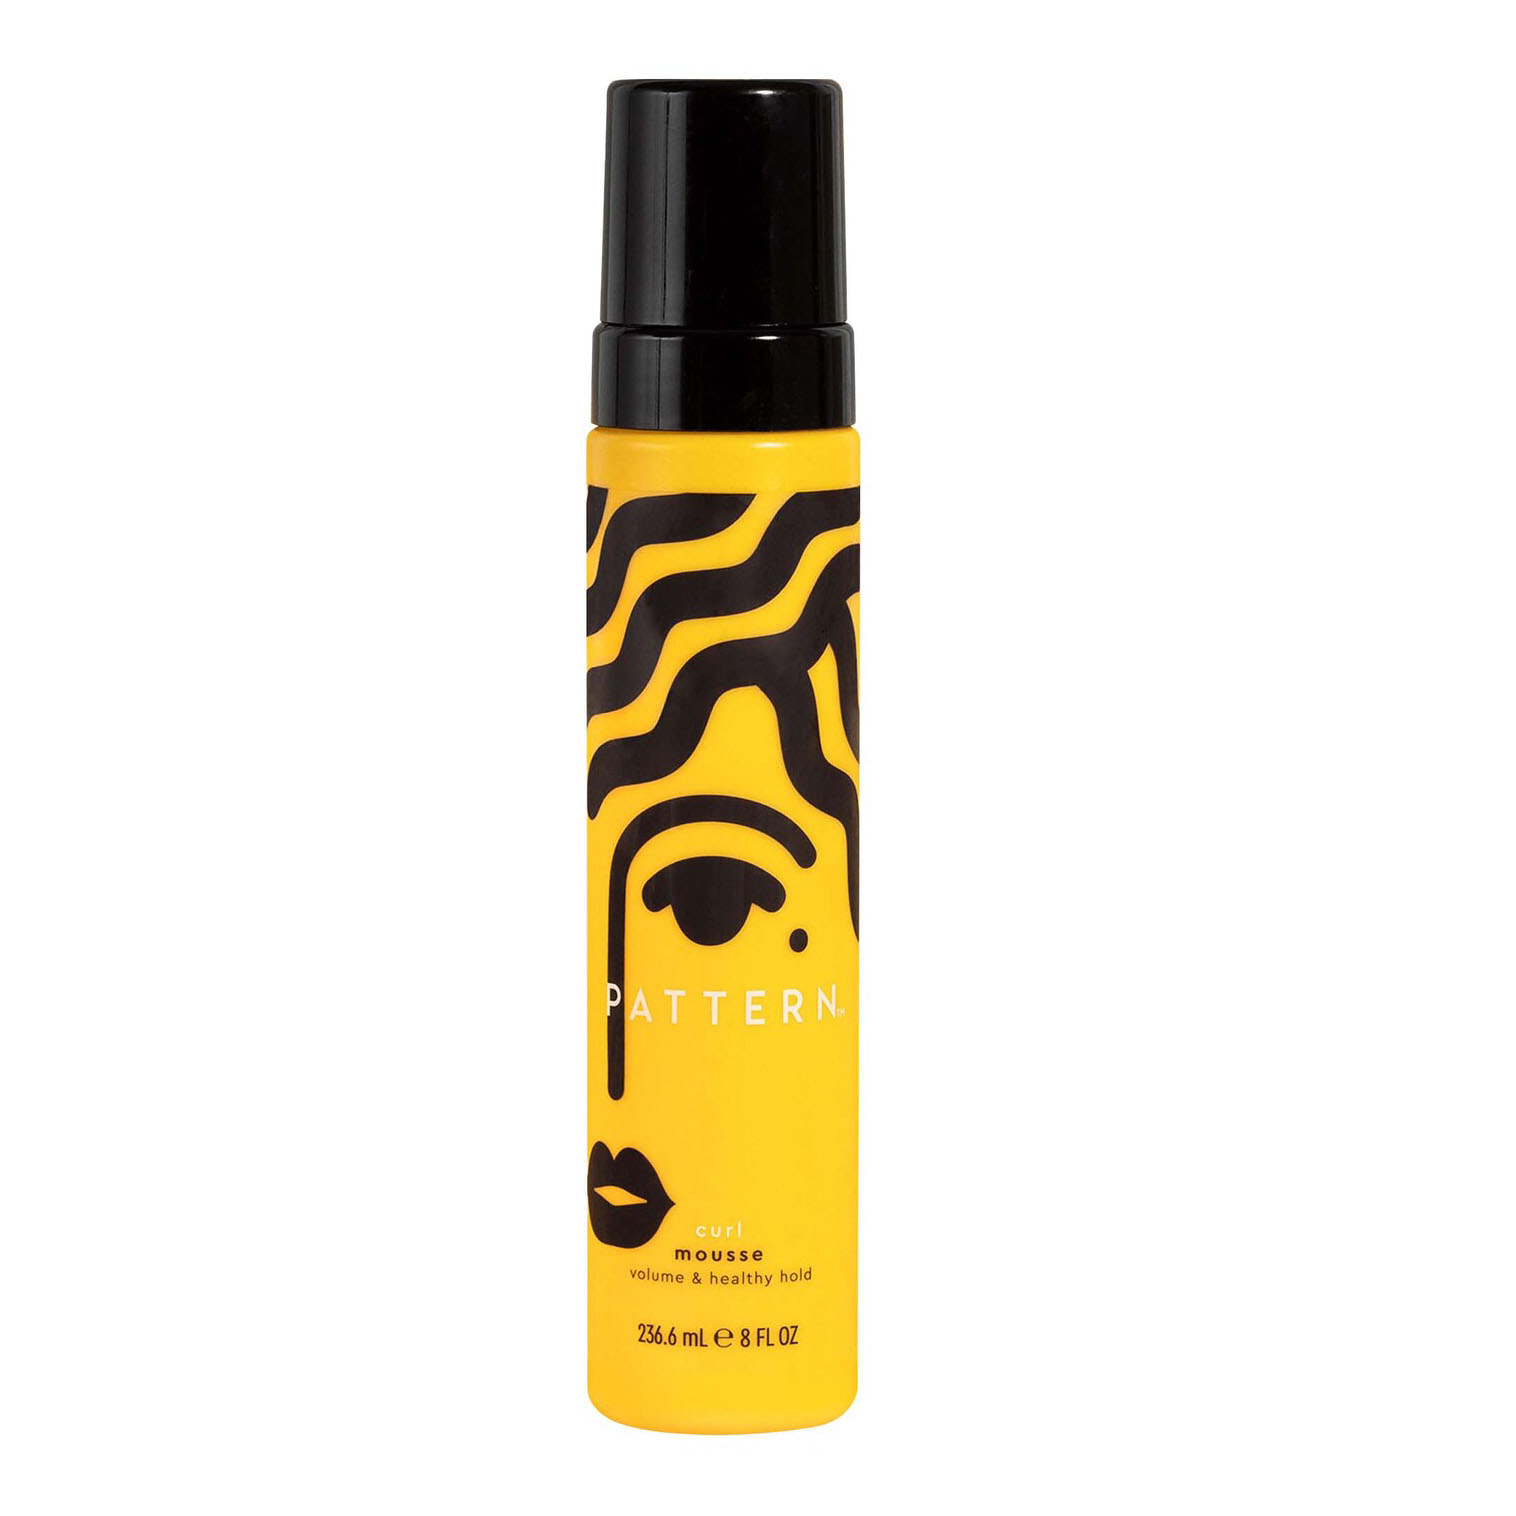 yellow and black bottle of PATTERN by Tracee Ellis Ross Curl Mousse